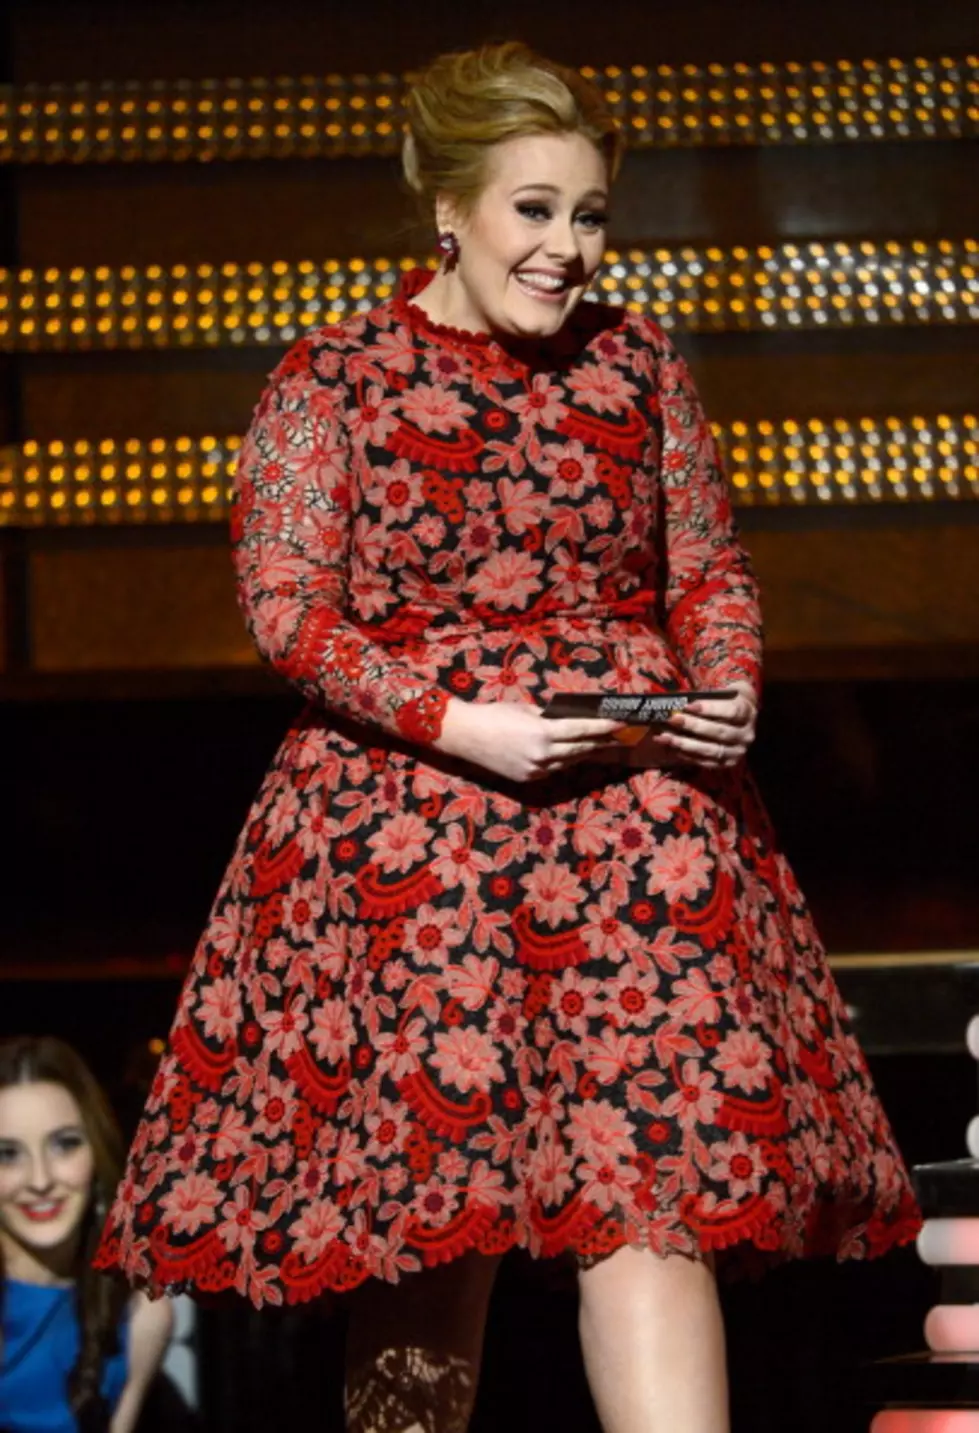 Adele to perform in Philadelphia for 2 shows in 2016